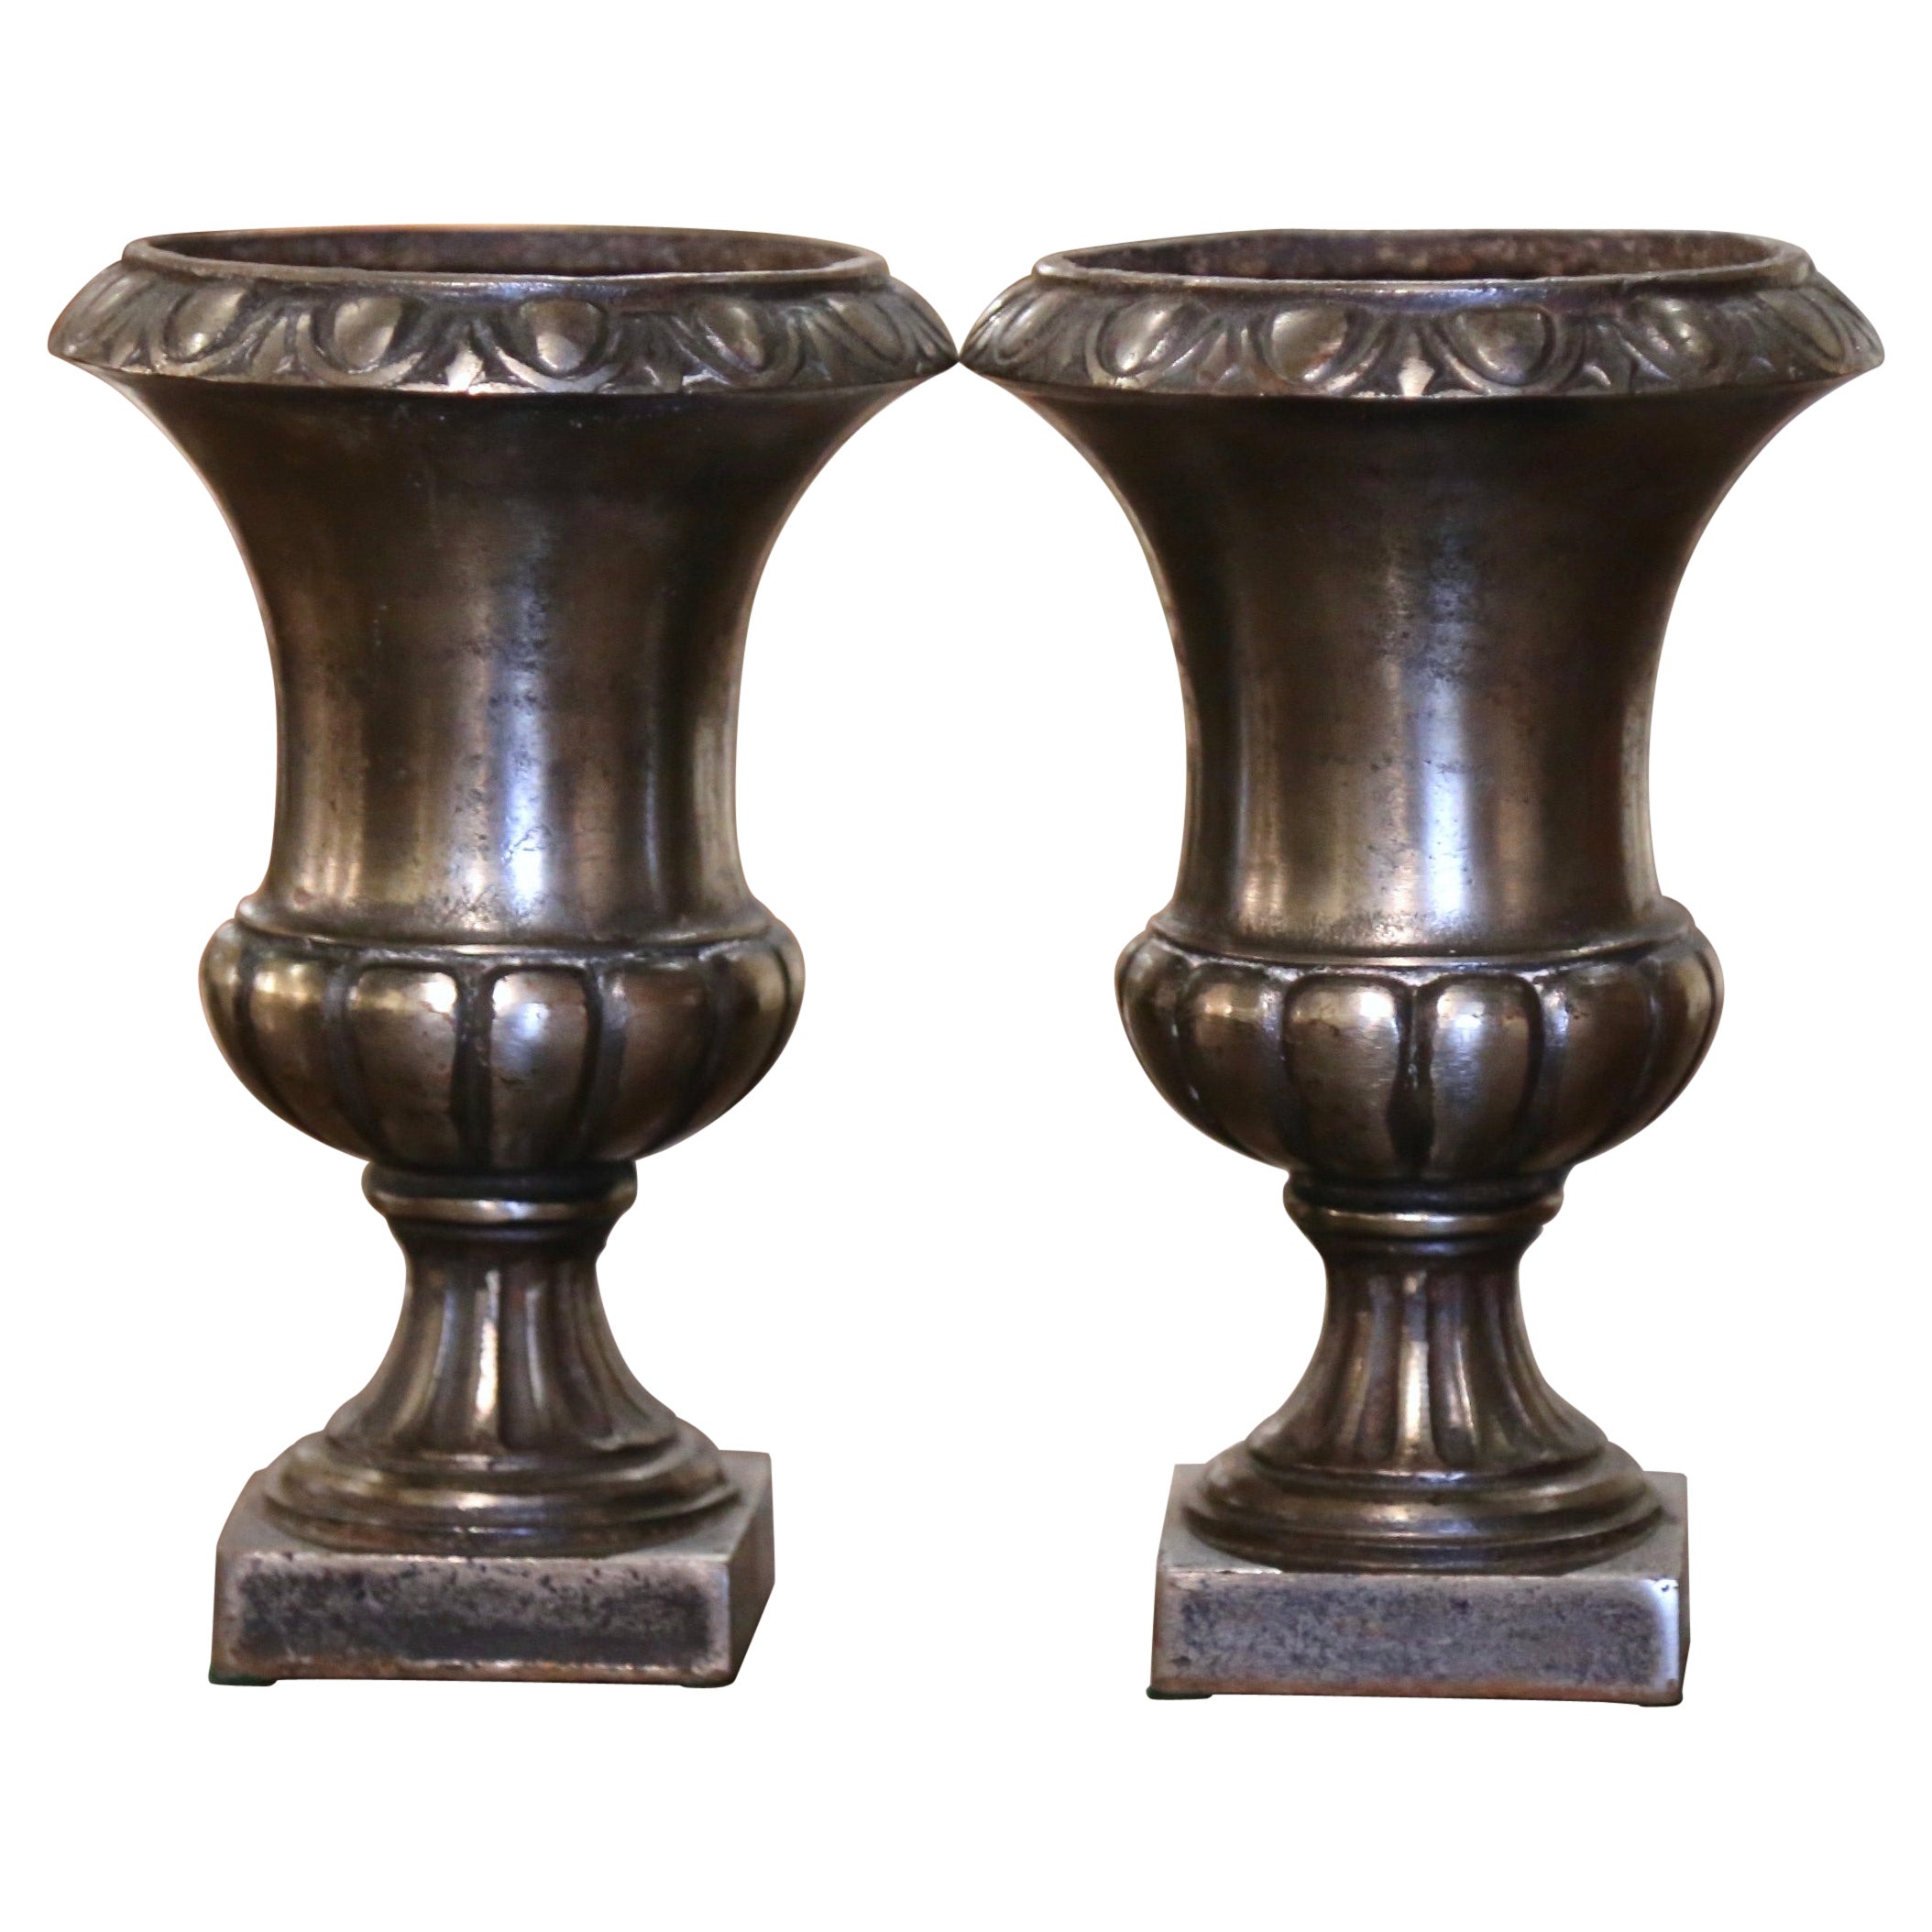 Pair of 19th Century French Neoclassical Polished Iron Campana Form Urns For Sale